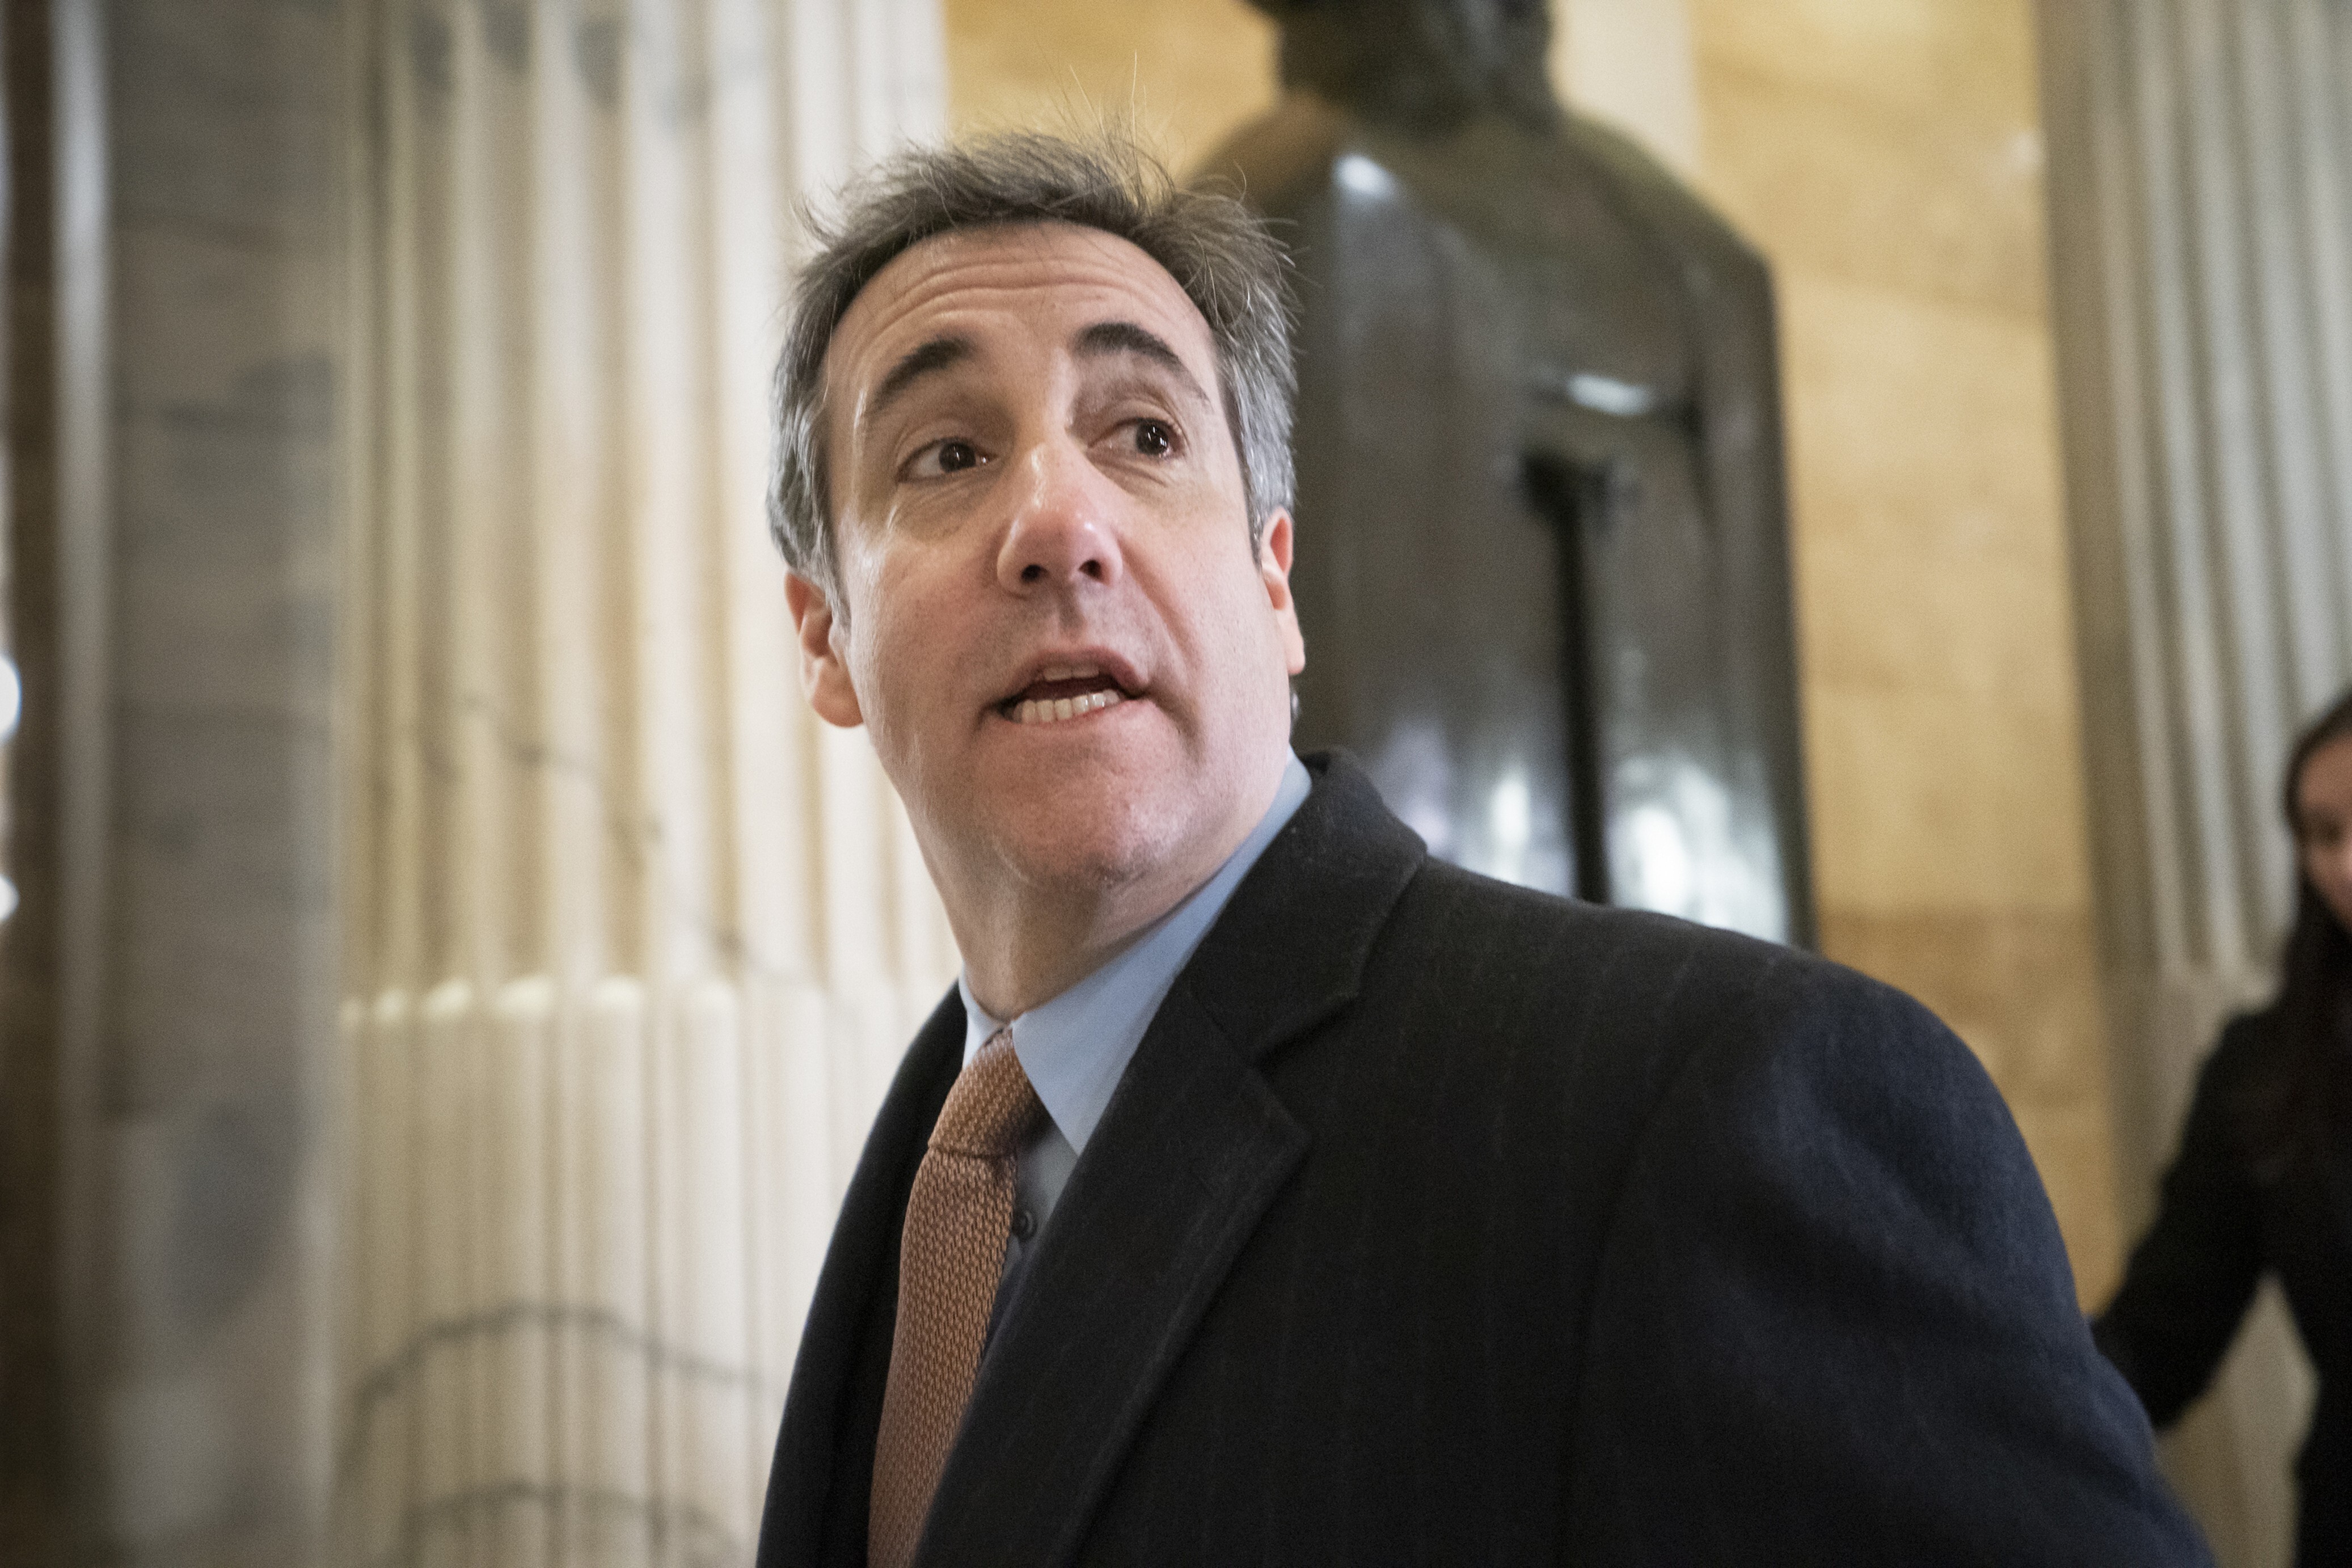 Michael Cohen, US President Donald Trump's former lawyer, returns to testify on Capitol Hill in March 2019. Photo: AP